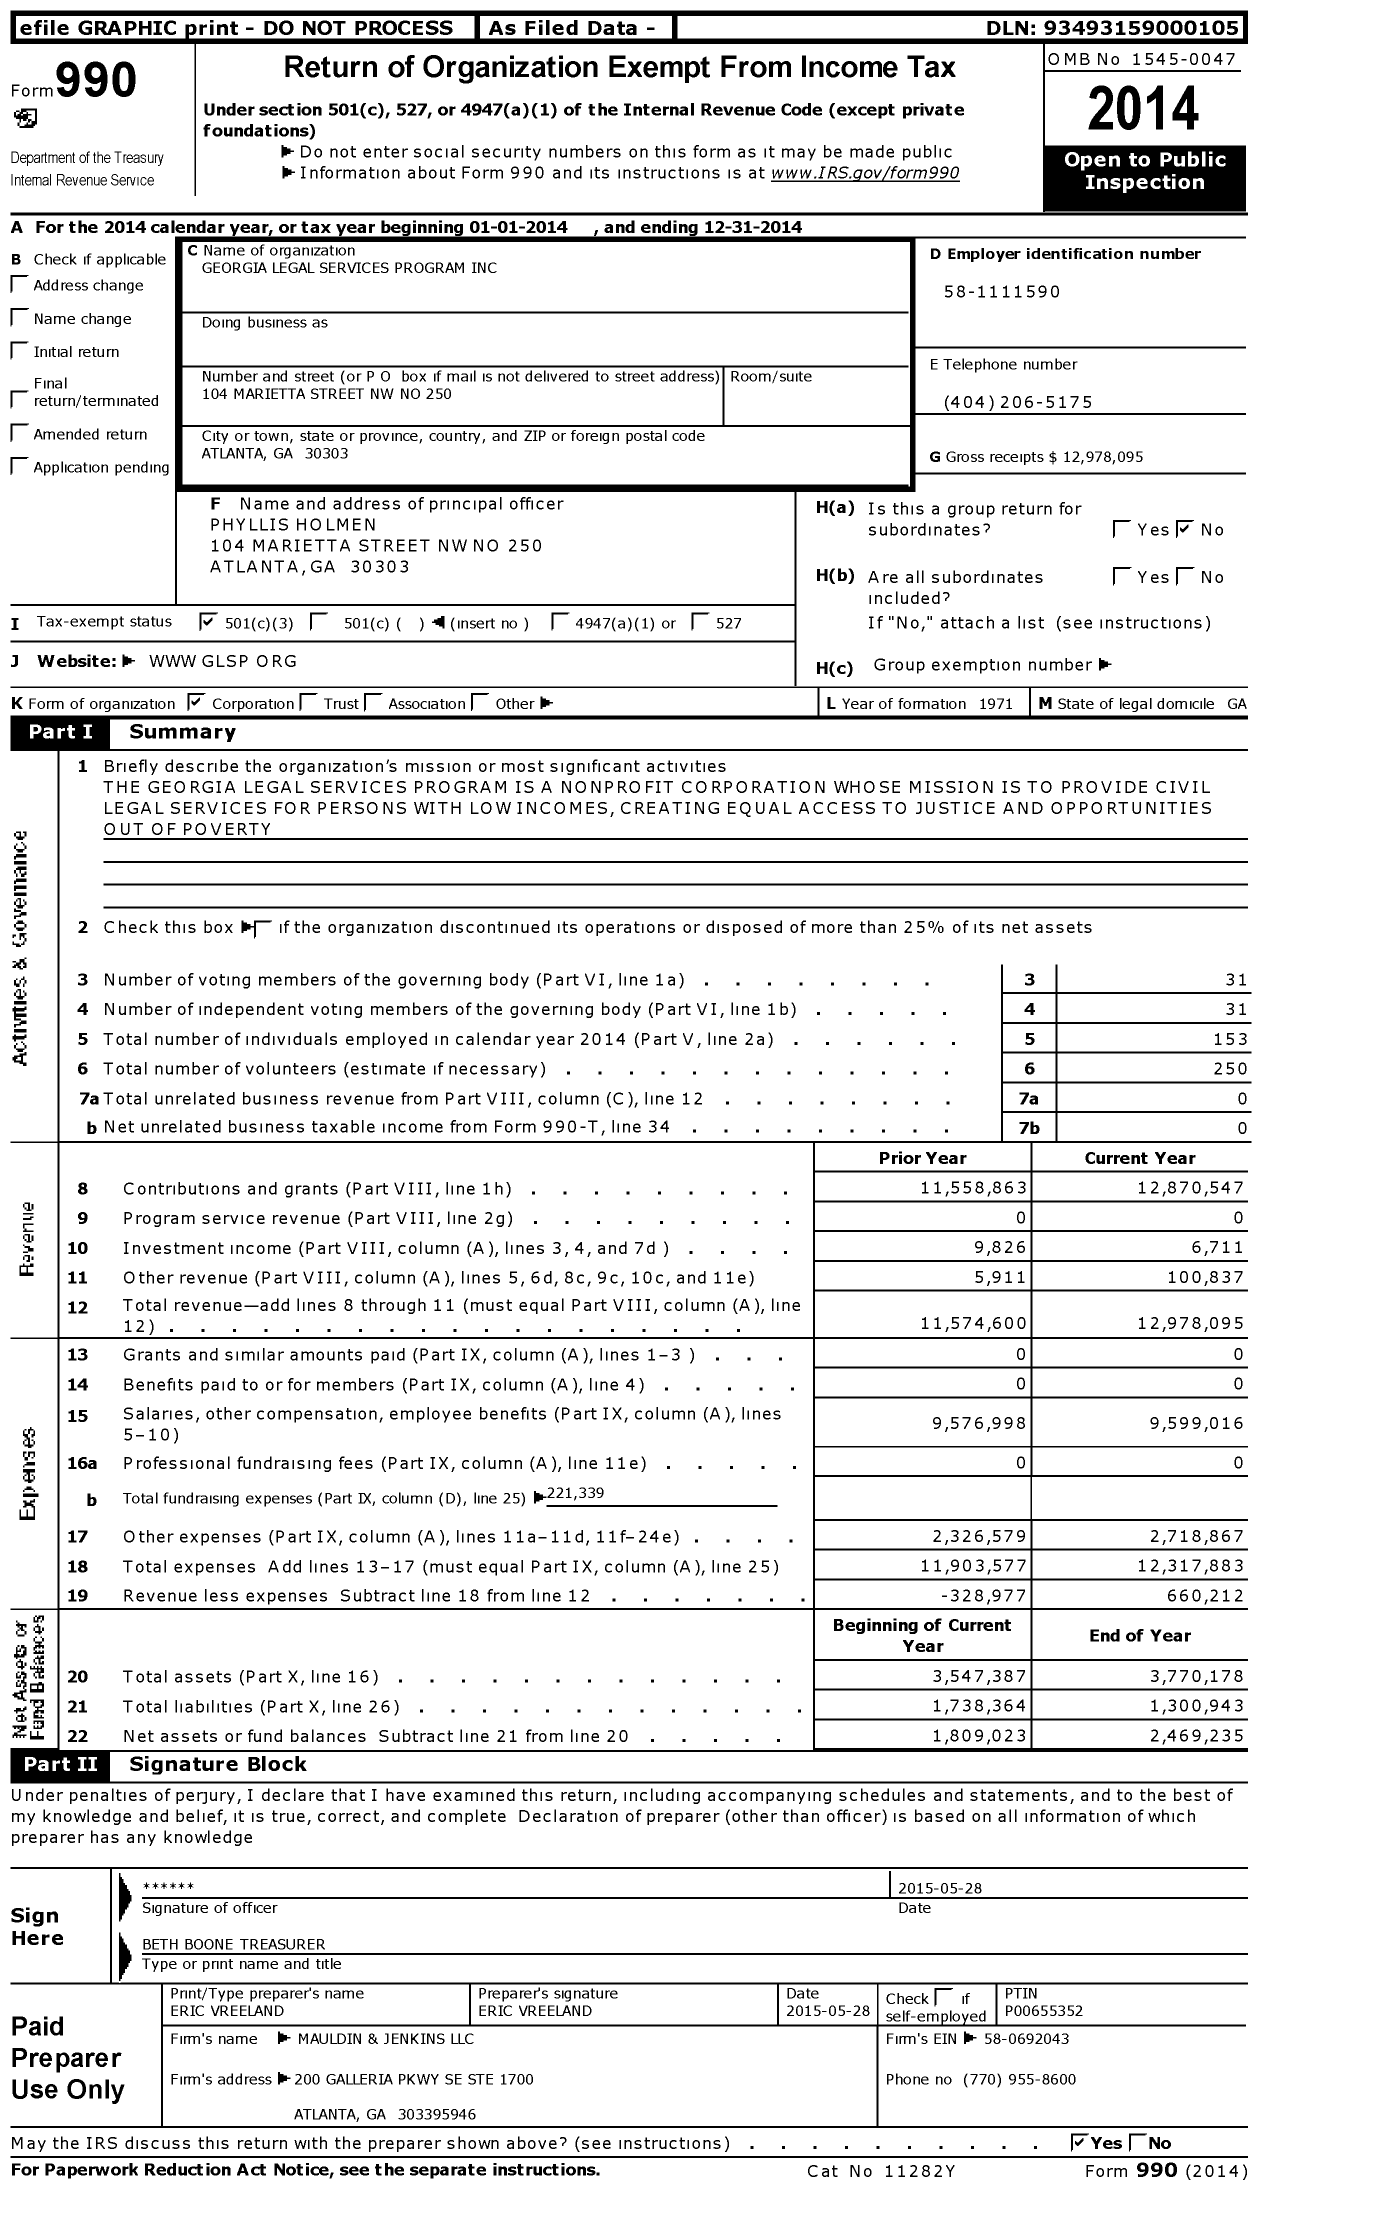 Image of first page of 2014 Form 990 for Georgia Legal Services Program (GLSP)